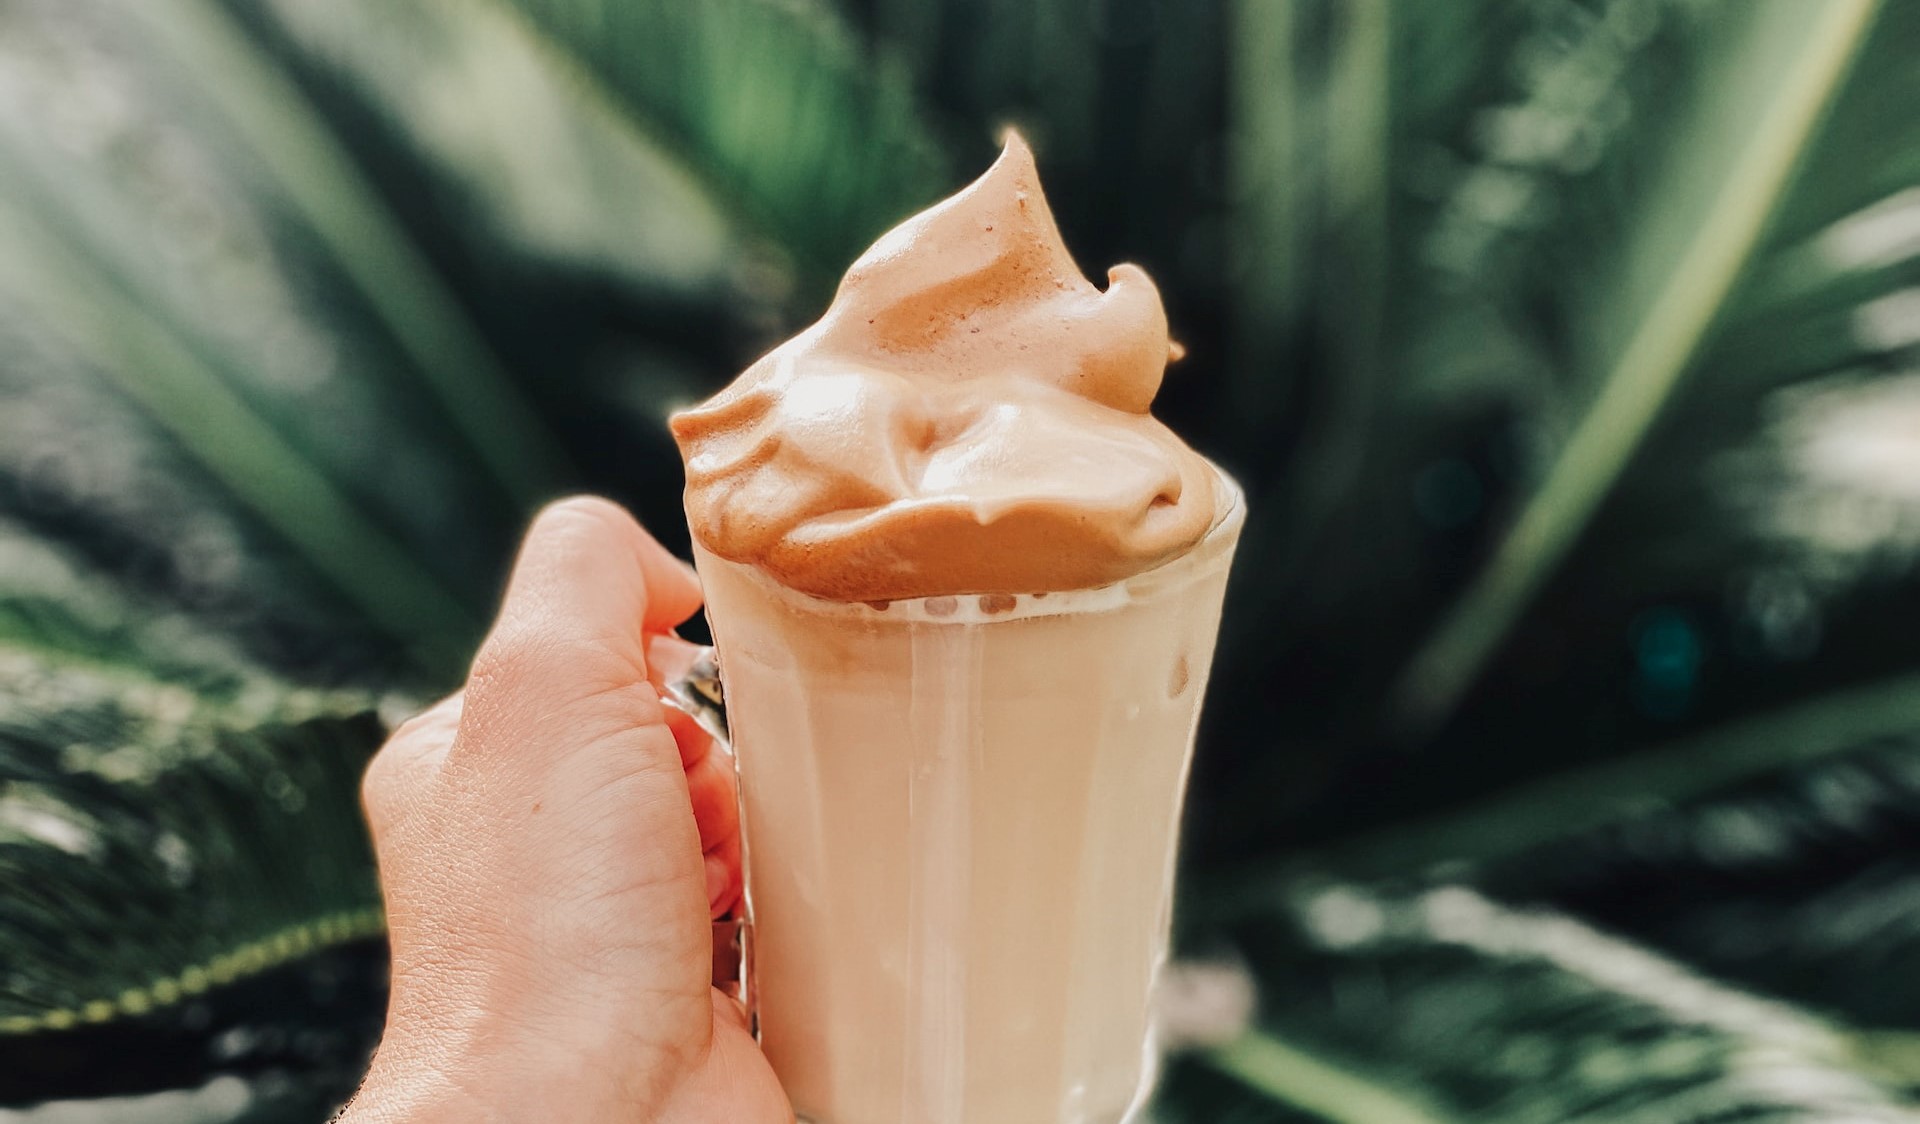 Whipped coffee is one of the best TikTok food trends.